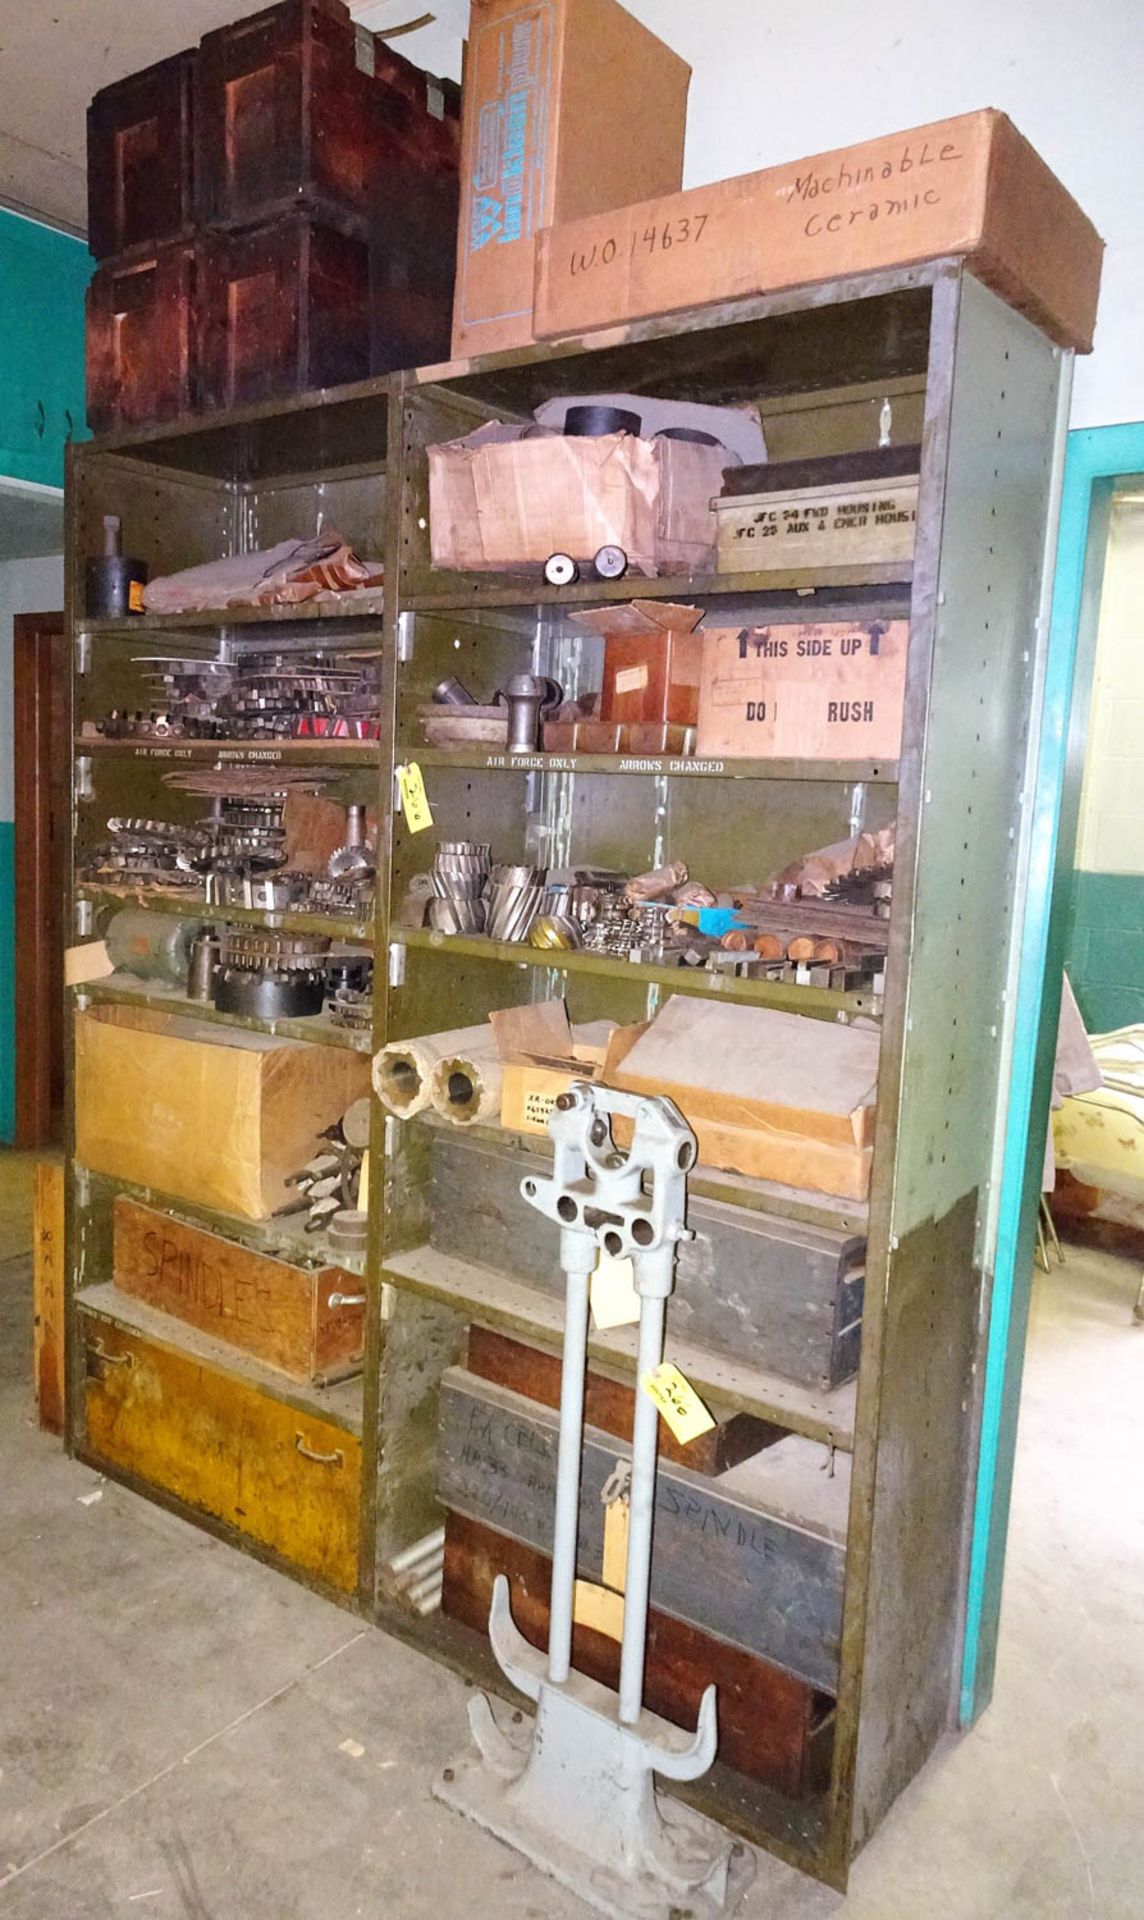 HEAVY DUTY STEEL RACK WITH CONTENTS, INCLUDING: SPINDLES, GEARS, CUTTERS, TOOL HOLDERS, MATERIAL